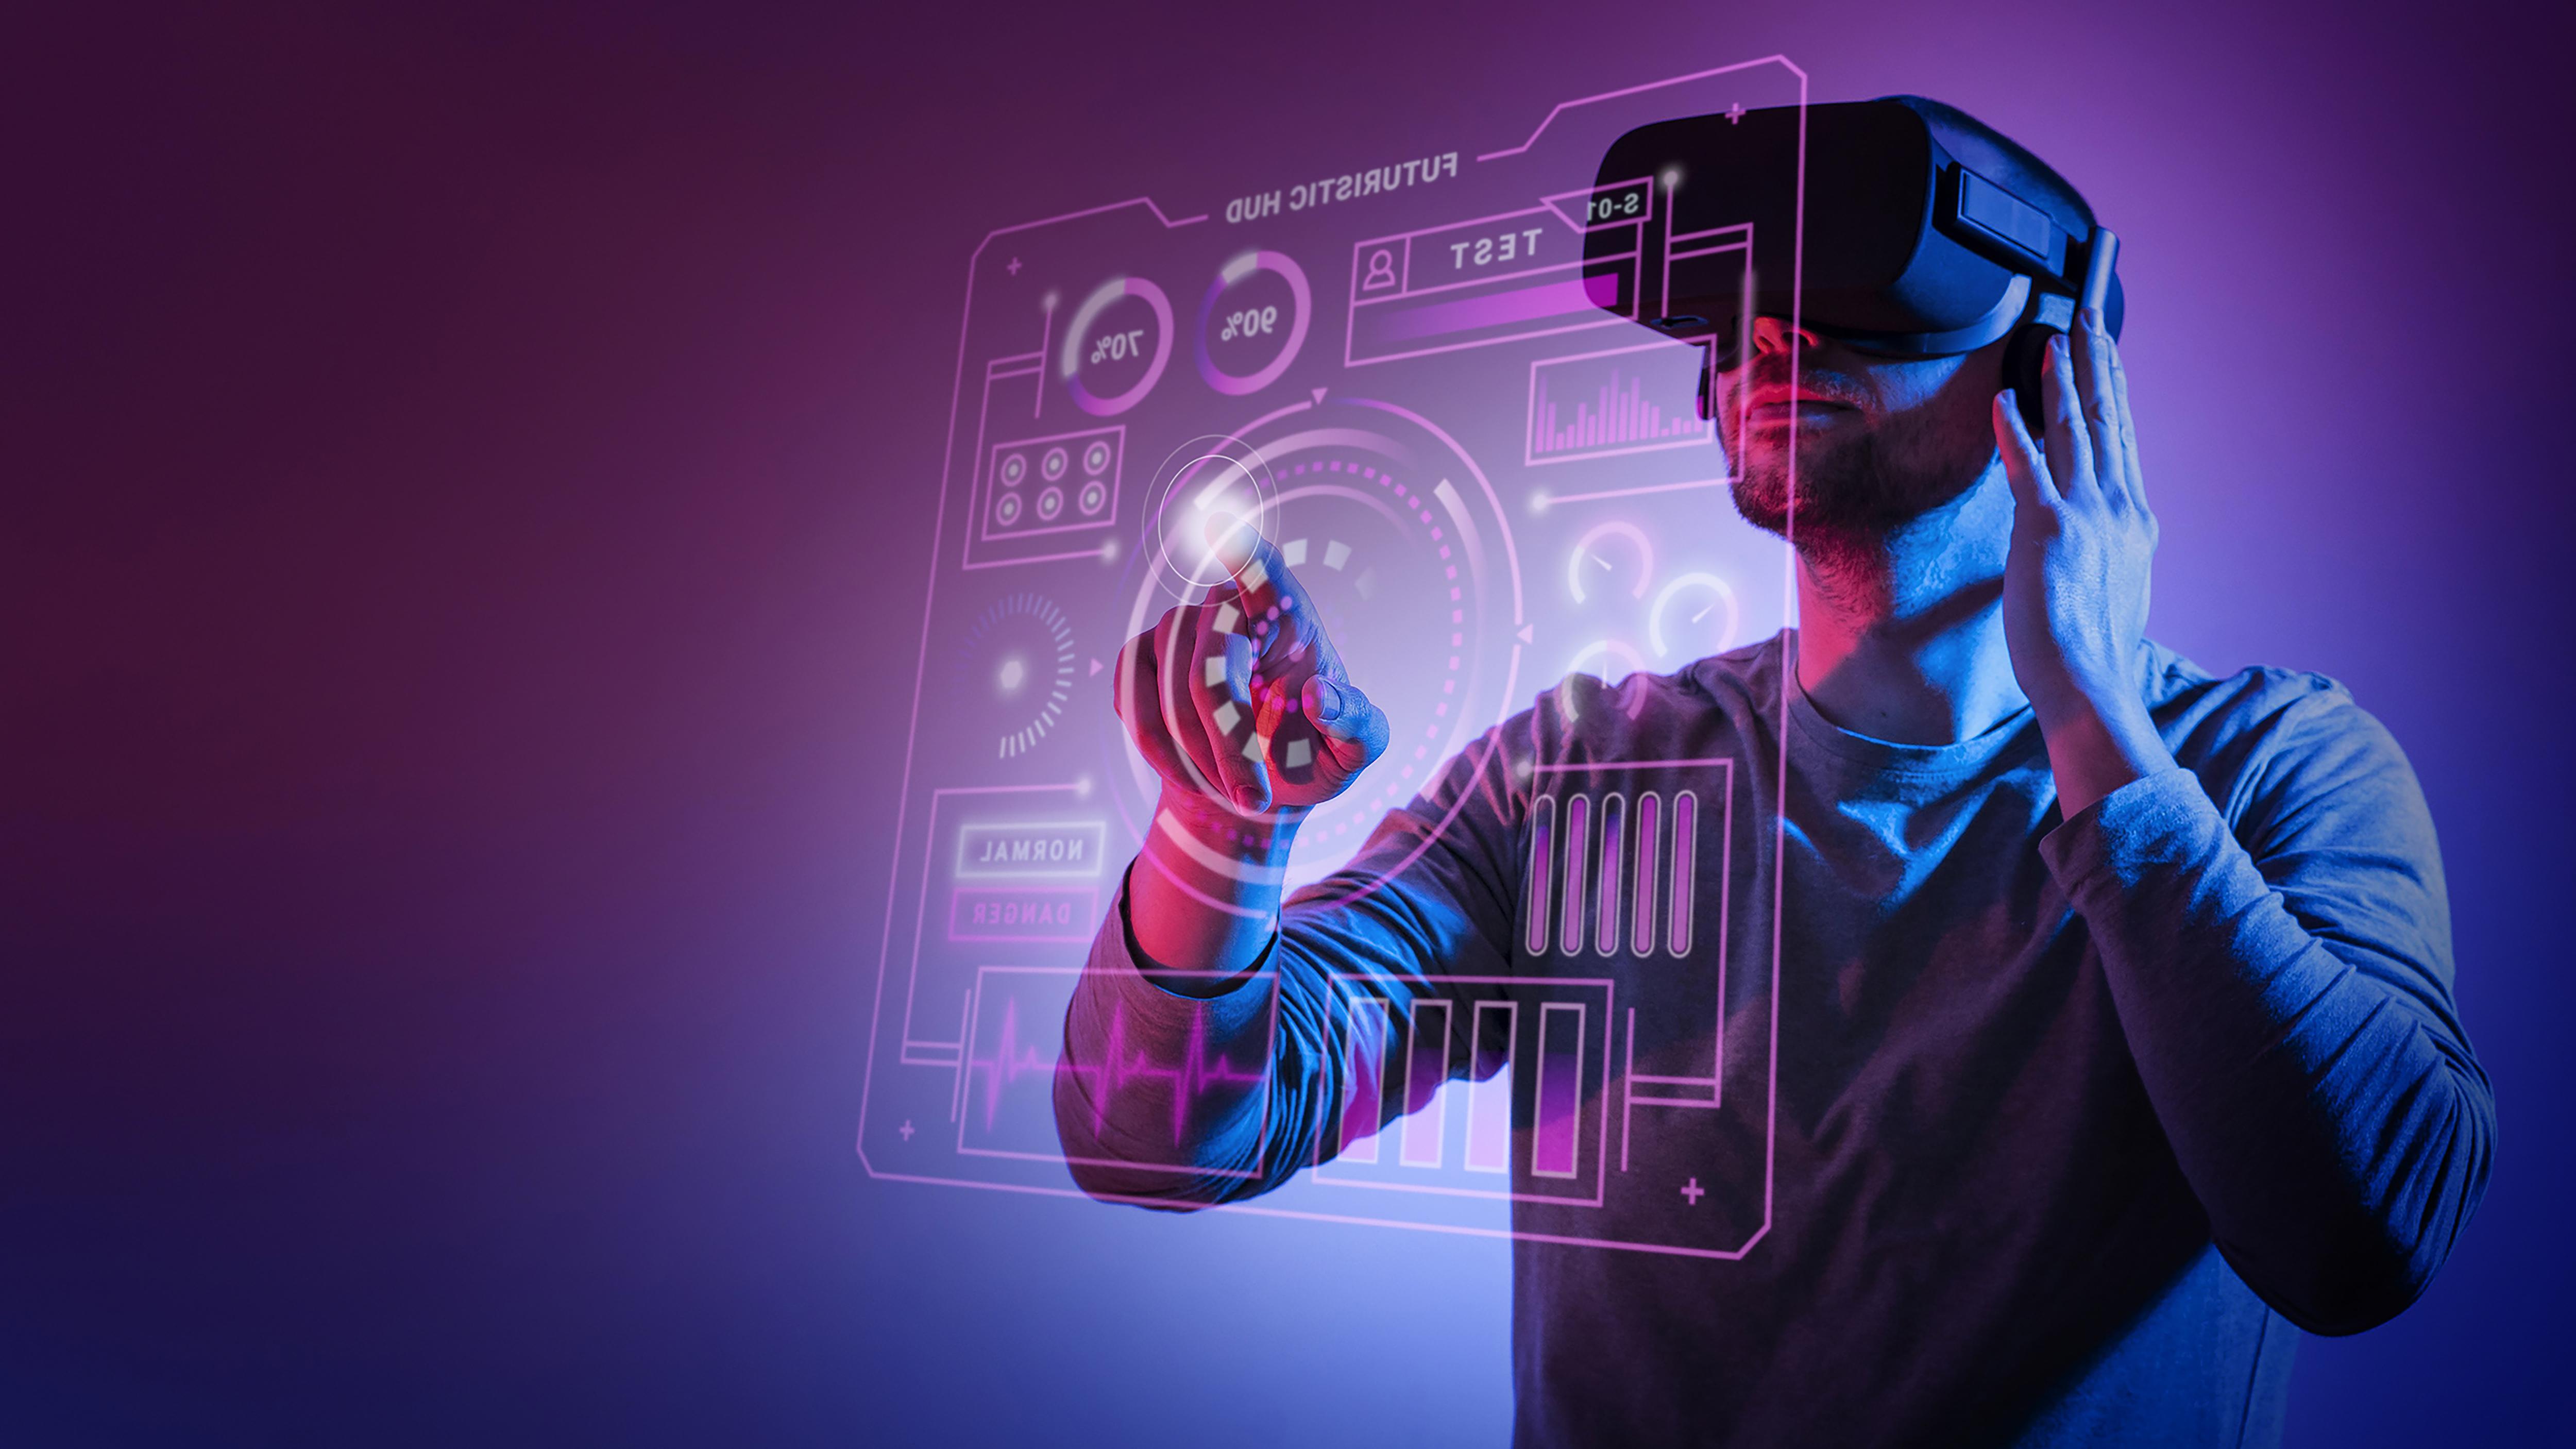 Metaverse is projected to be the future of the online gaming industry